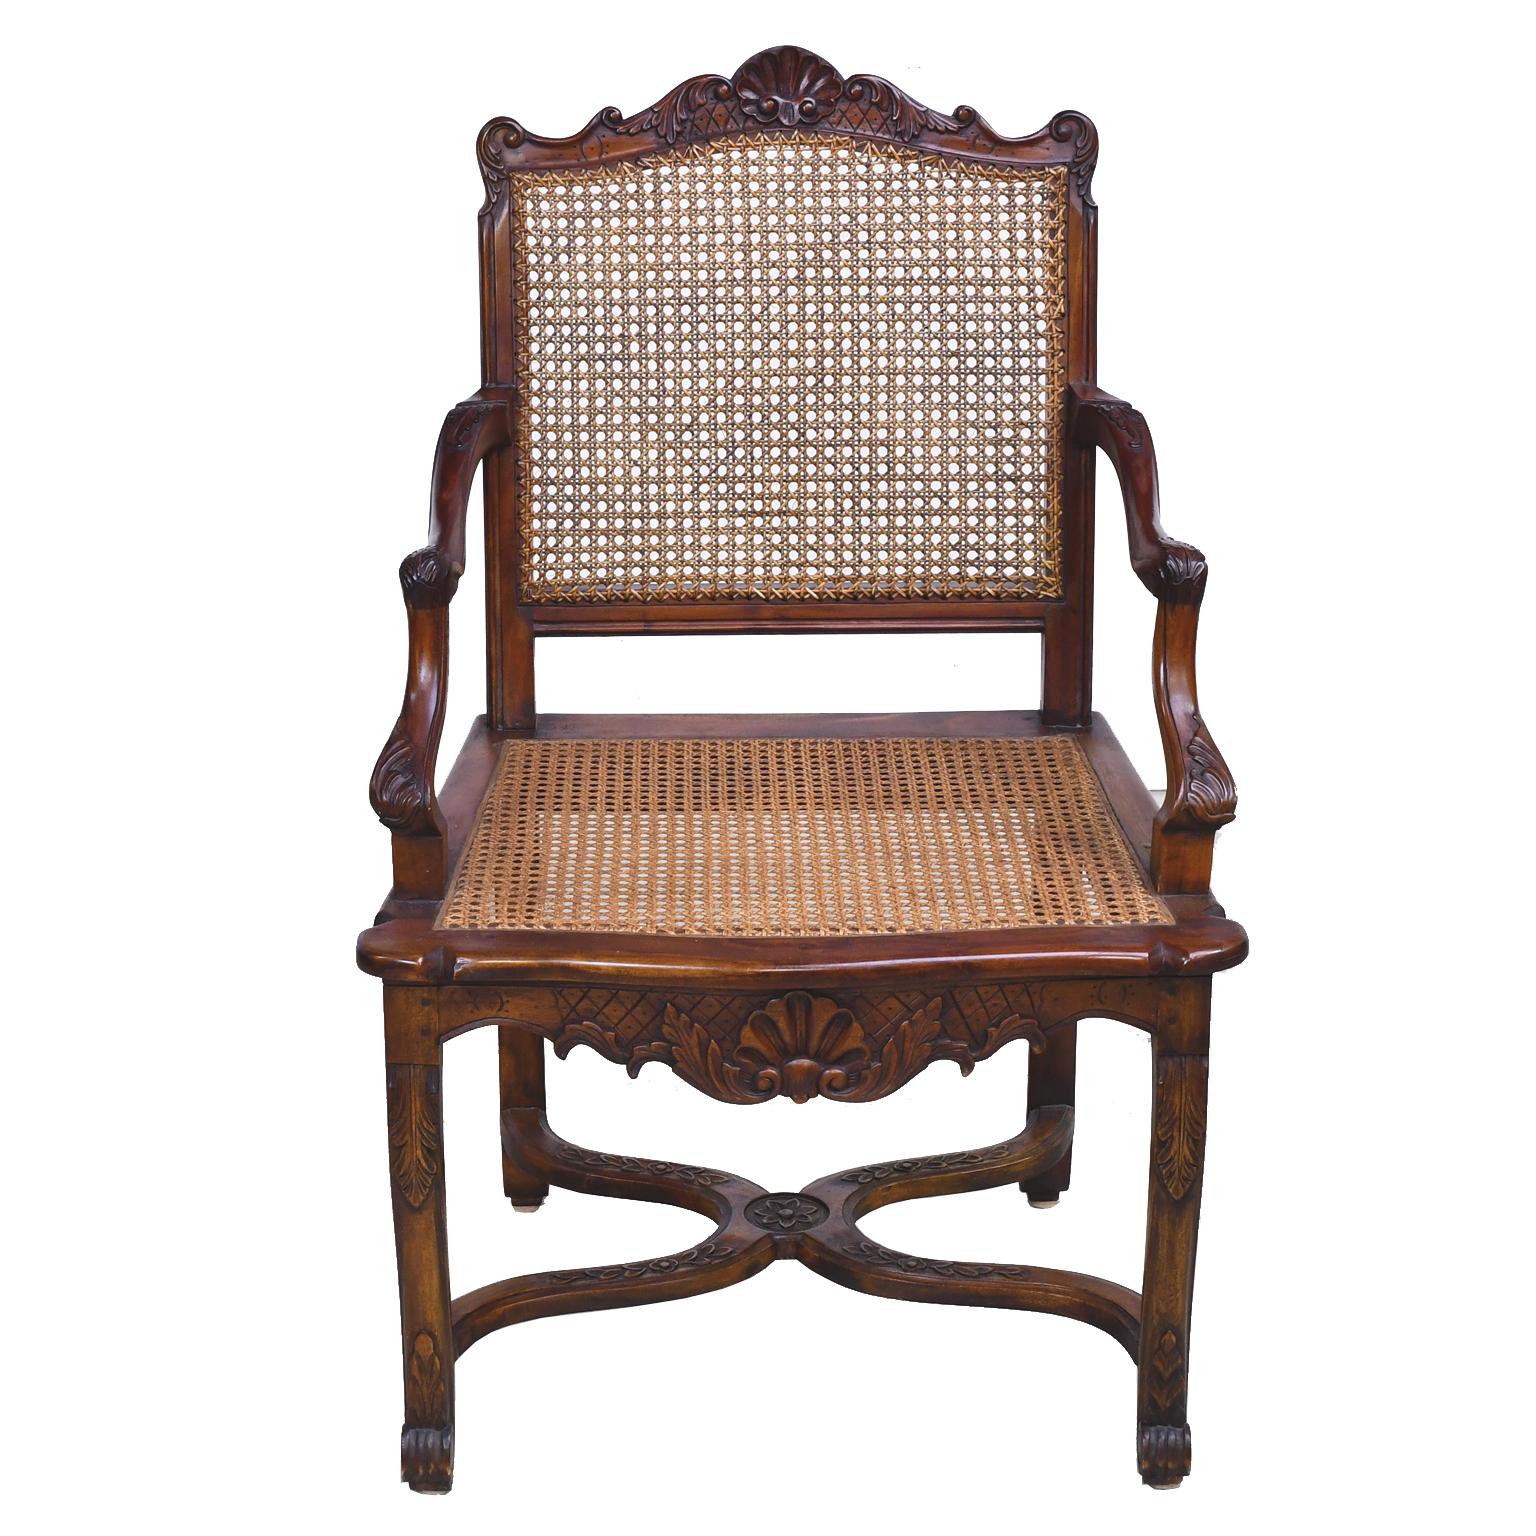 A beautiful and well-crafted set of six (6) dining chairs in mahogany comprising of two (2) armchairs and four (4) side chairs in the French Louis XIV style with caned back and seat. Rocaille & acanthus carvings embellish the crest rail, apron,